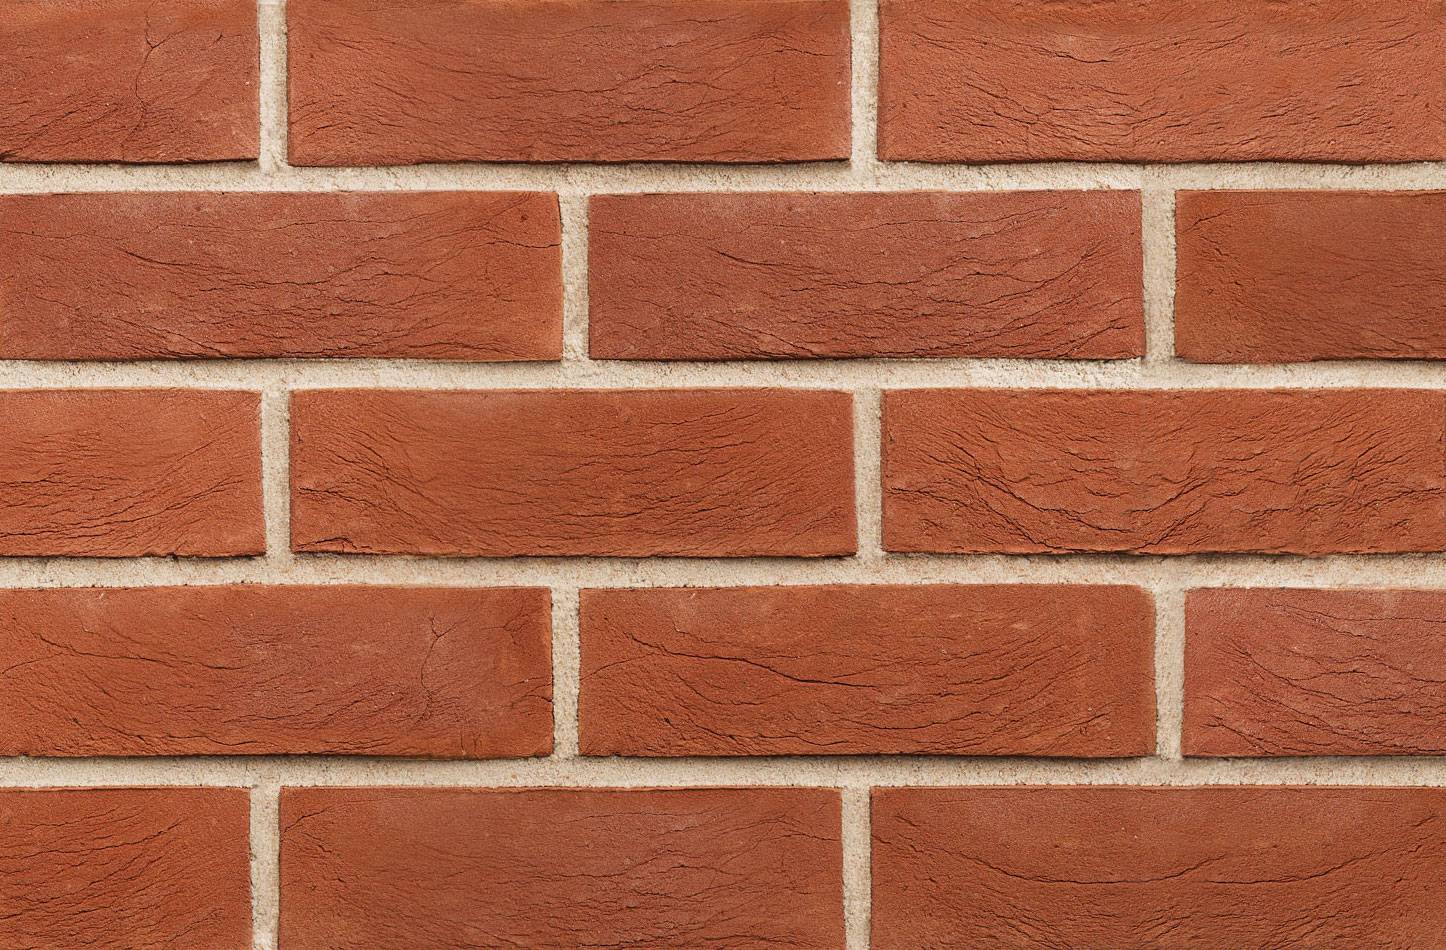 Charnwood Light Victorian Red Clay Brick